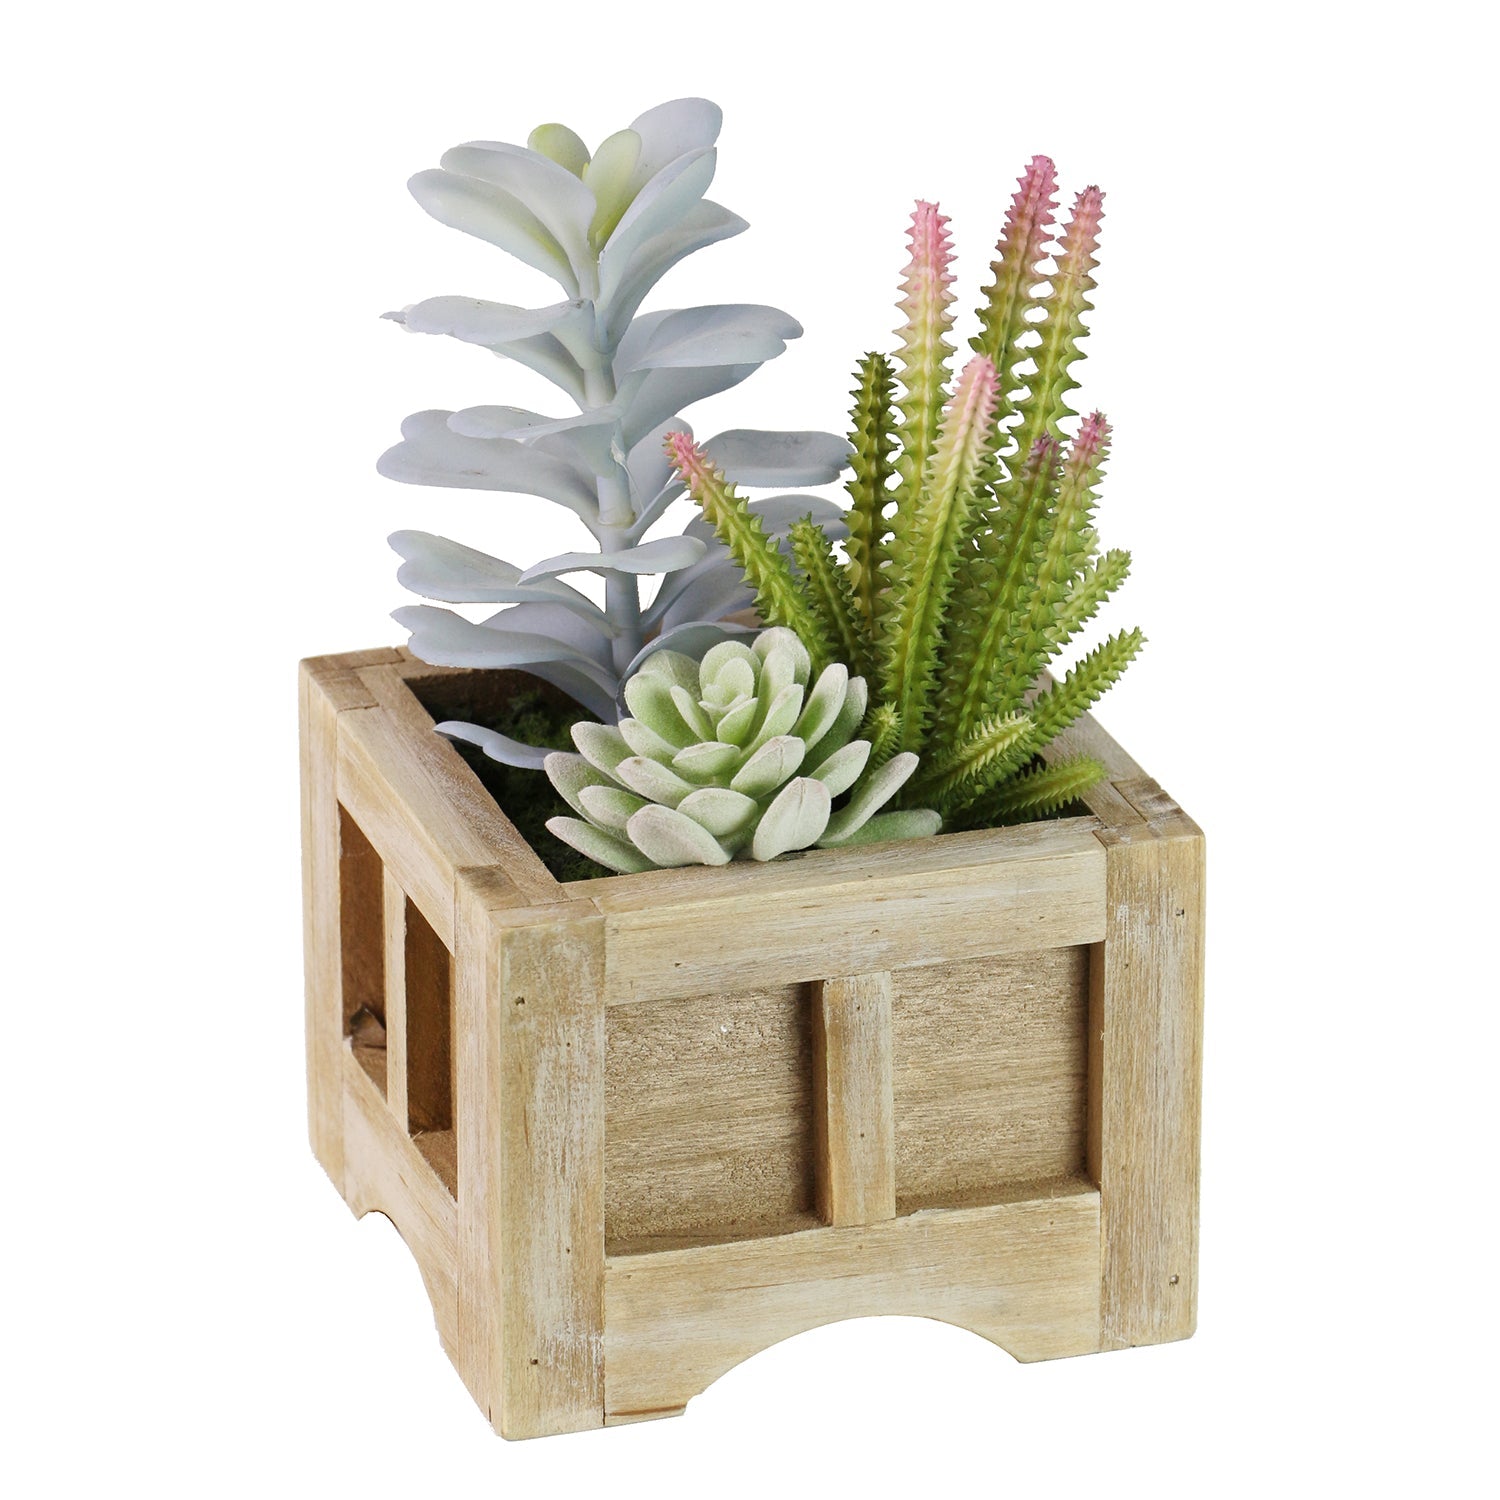 Fresh Fusion Lifelike Plant in Rustic Wooden Pot